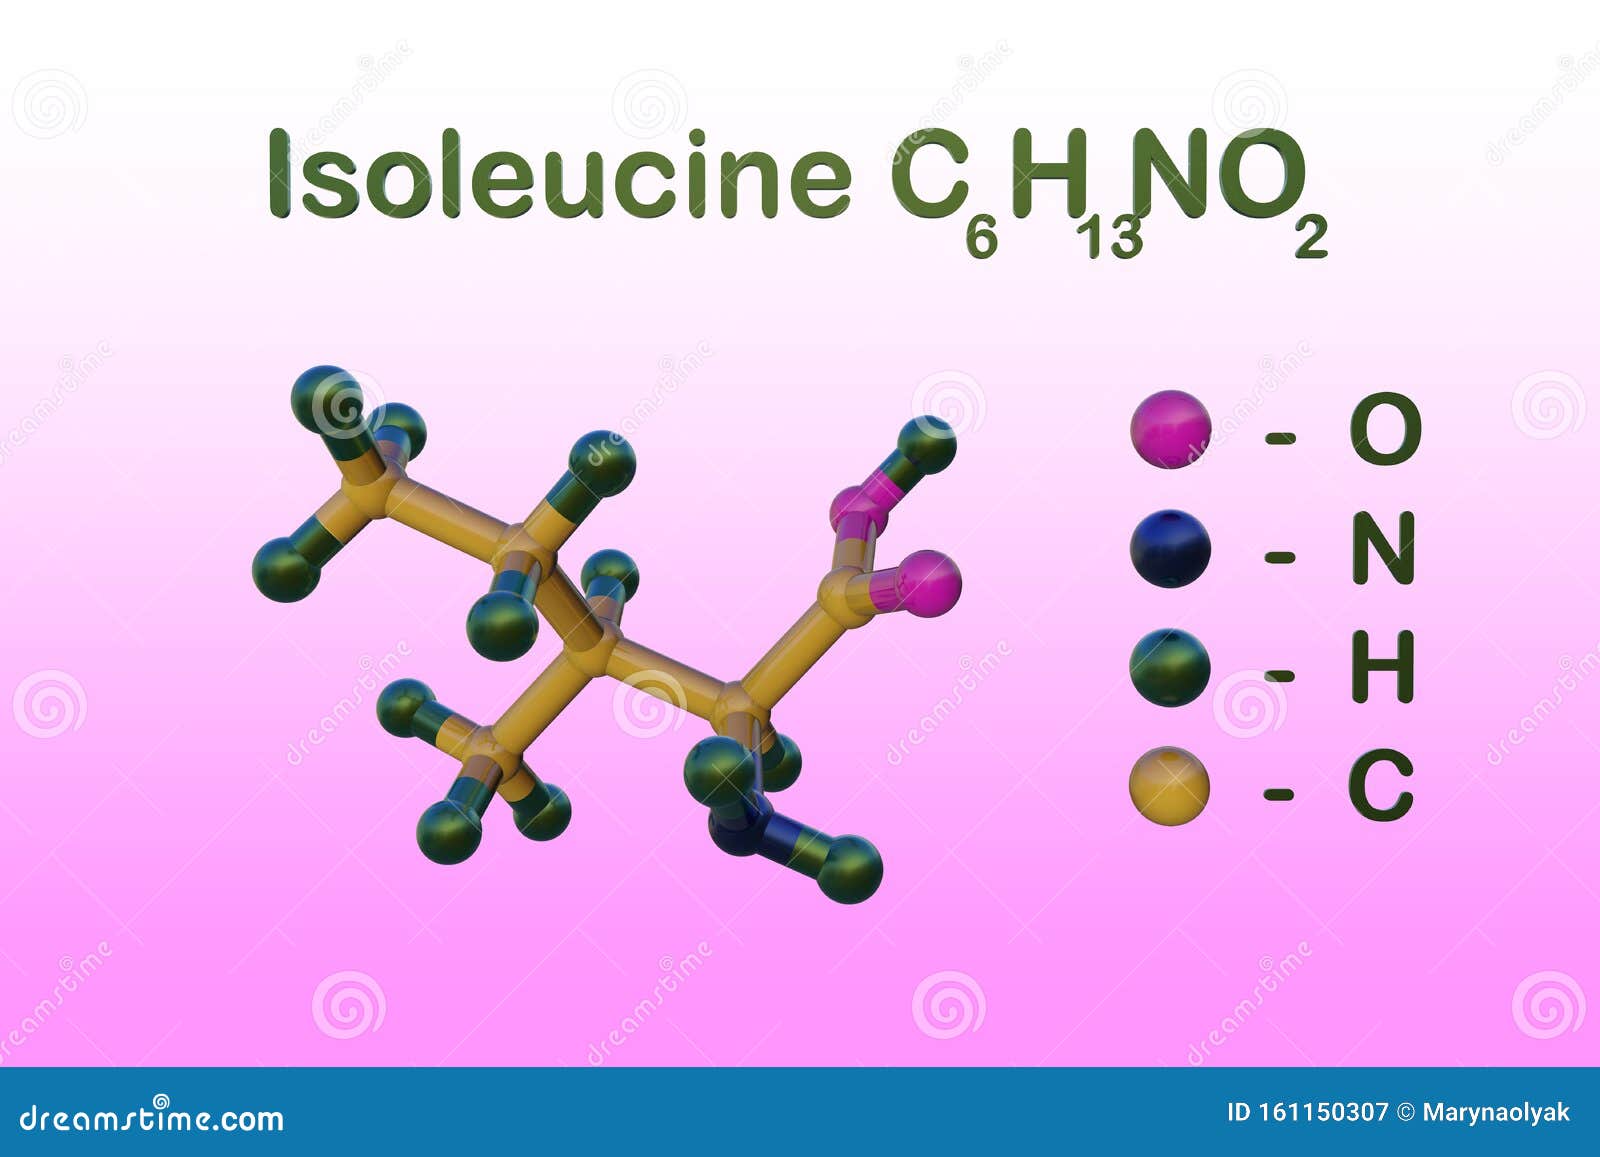 structural chemical formula and molecular model of l-isoleucine or isoleucine, an amino acid used in the biosynthesis of